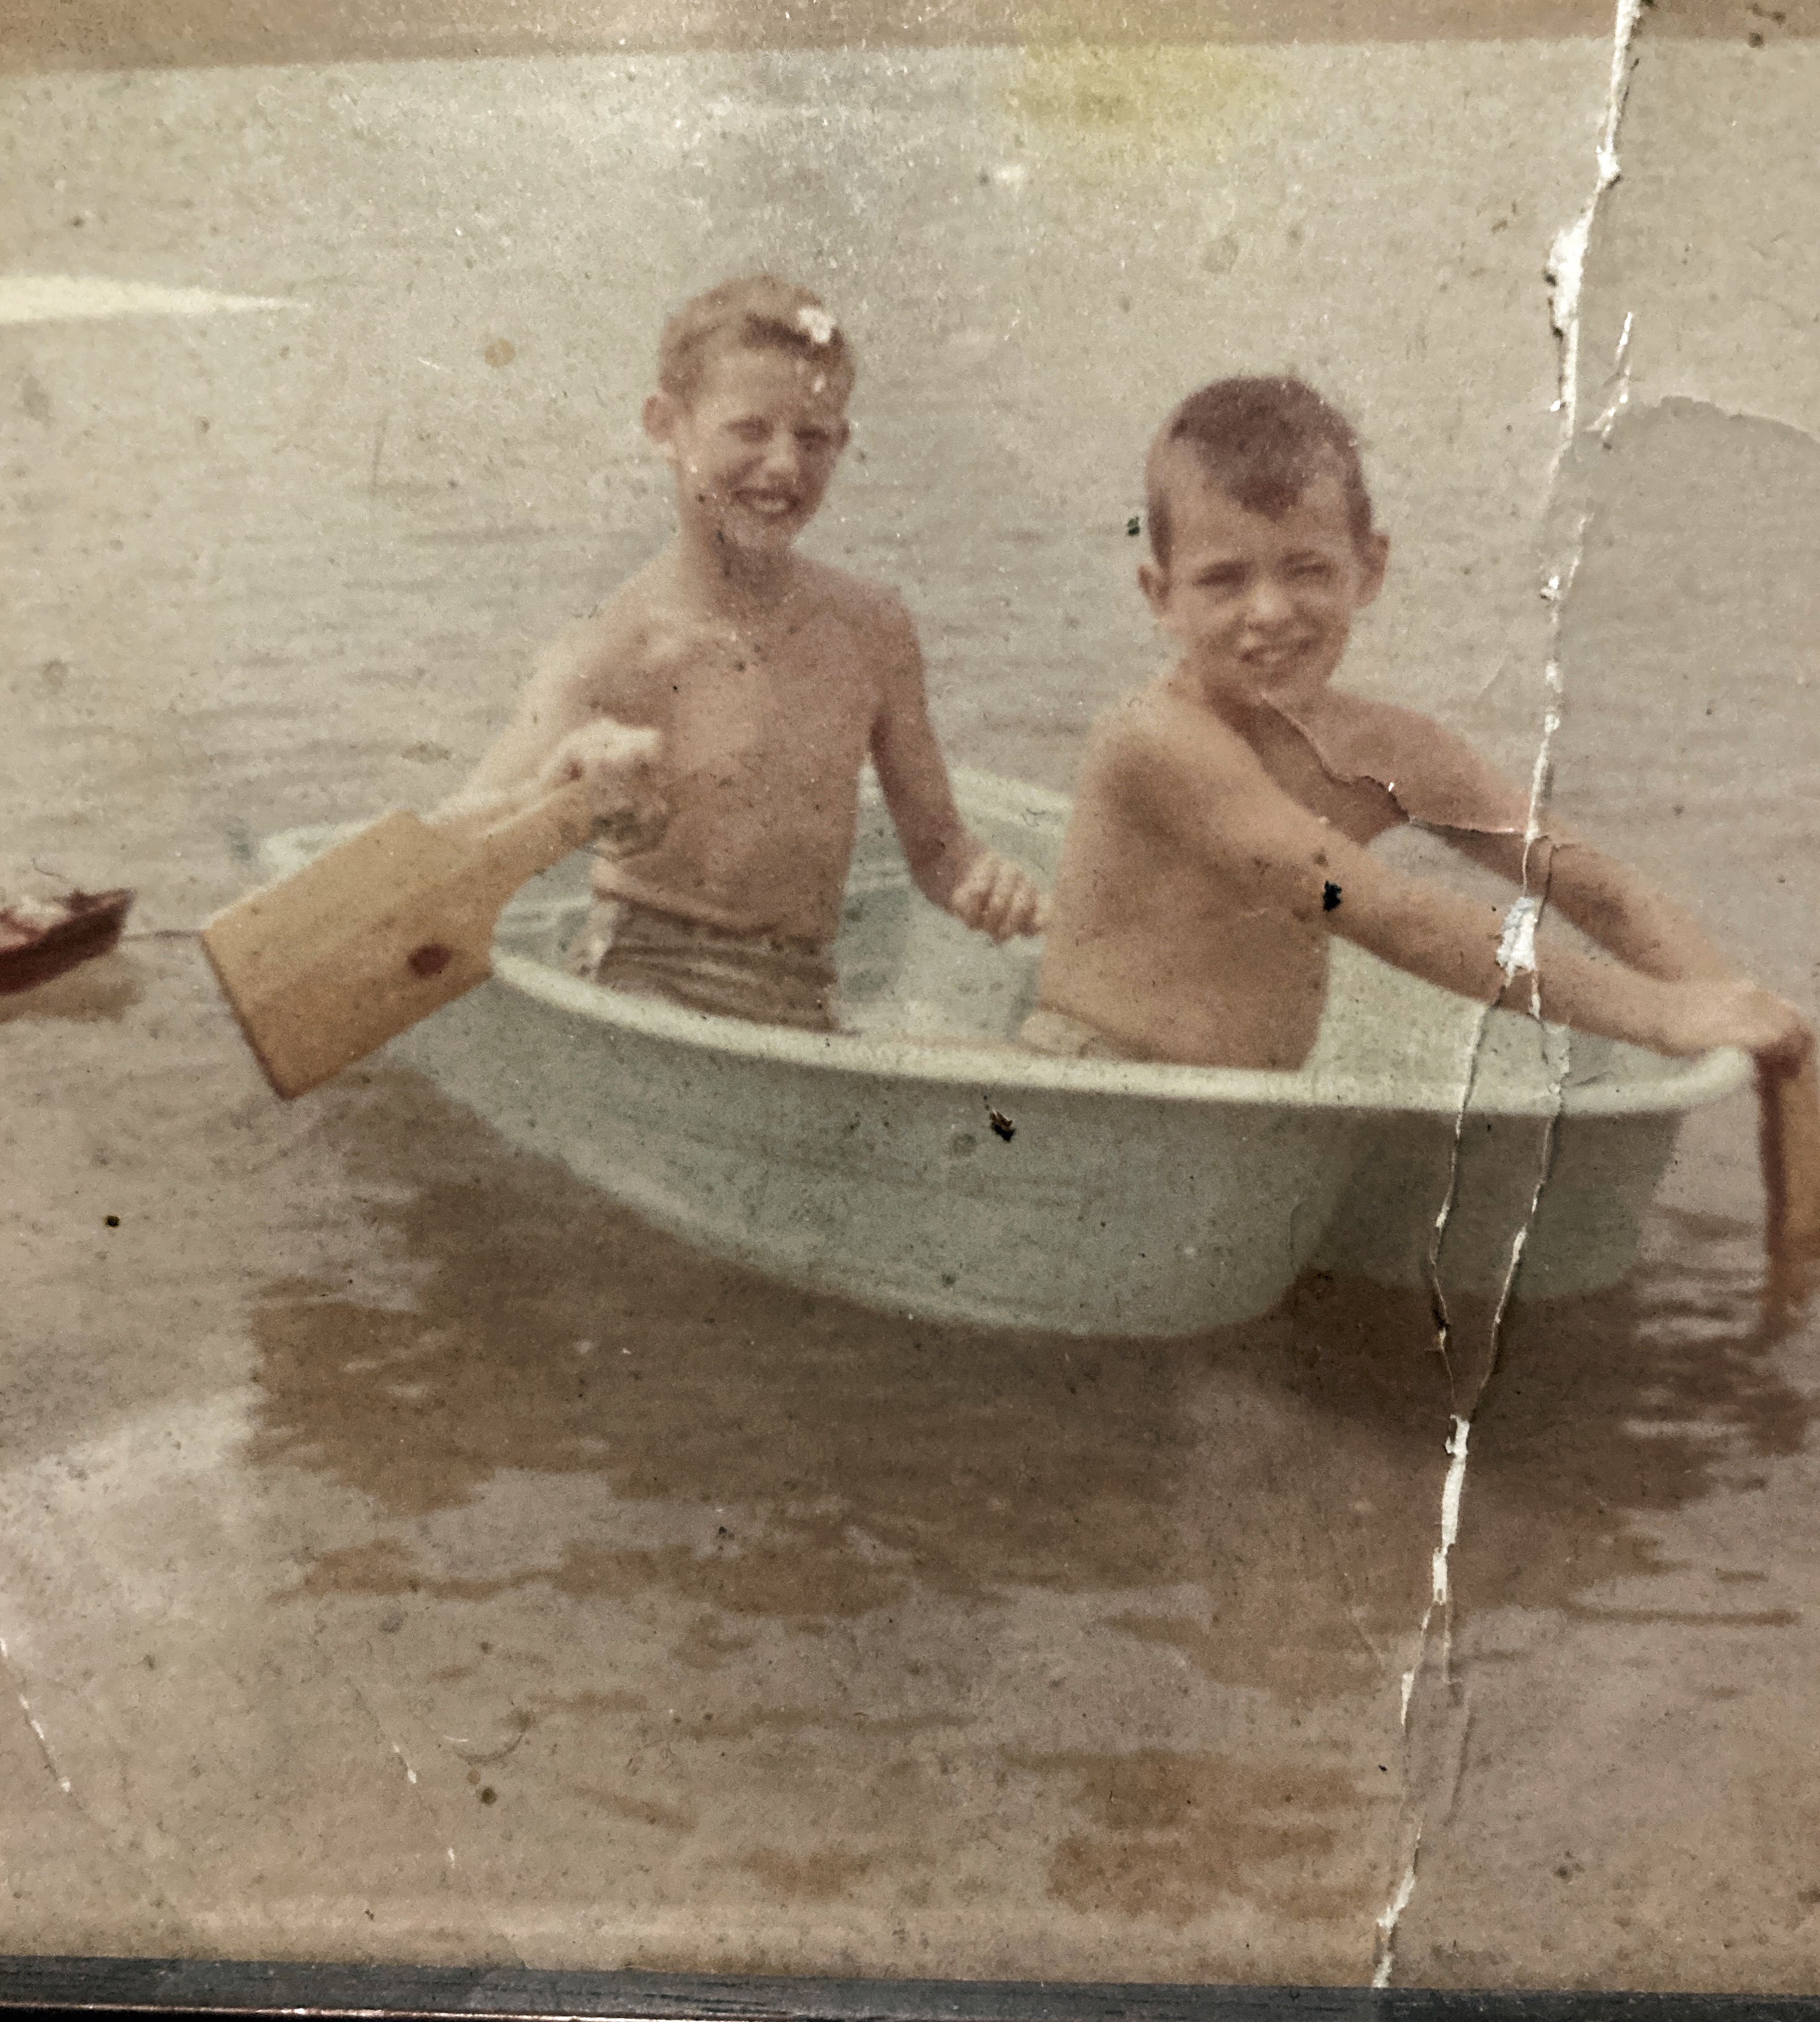 Walt and Doug Gross 1960 at The Waterbowl.